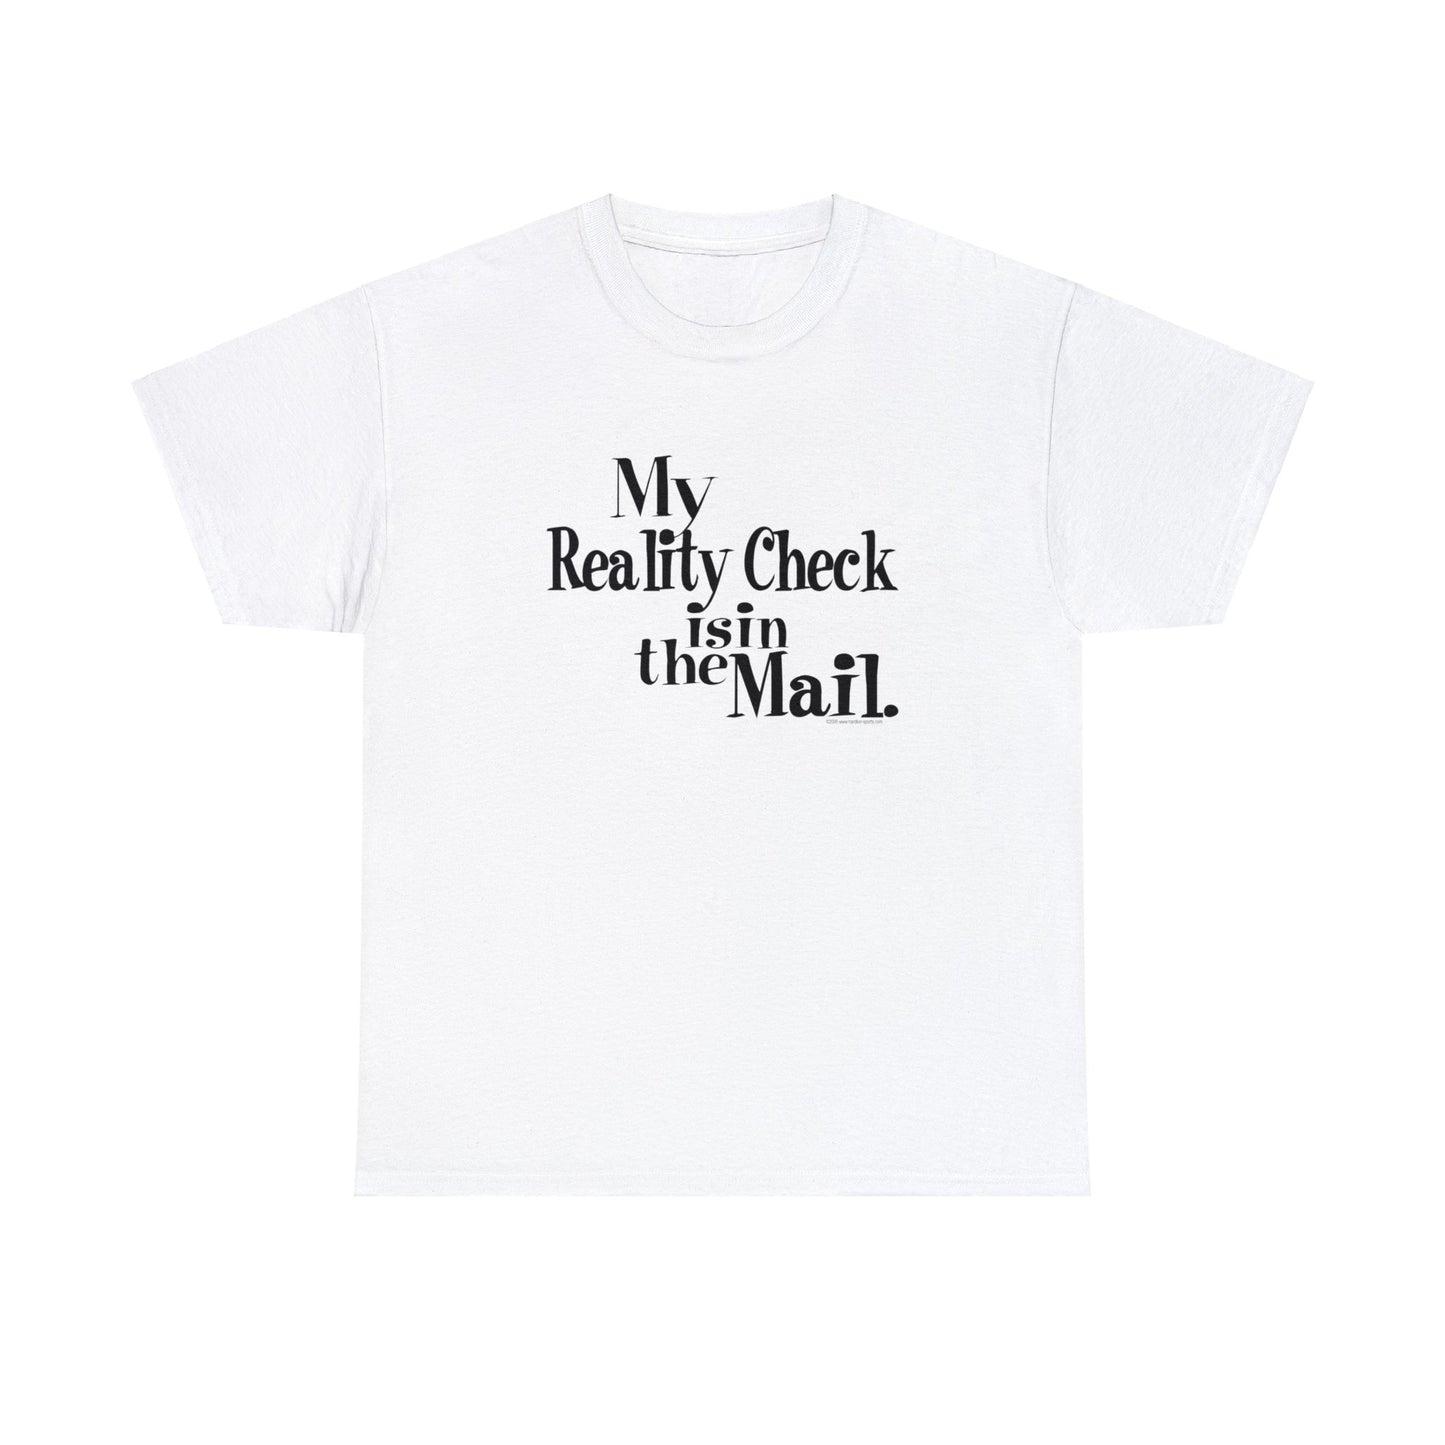 My Reality Check is in the Mail, funny t-shirt, Crazy t-shirt, reality check tee, humorous t-shirt, ironic t-shirt, t-shirt gift, reality T